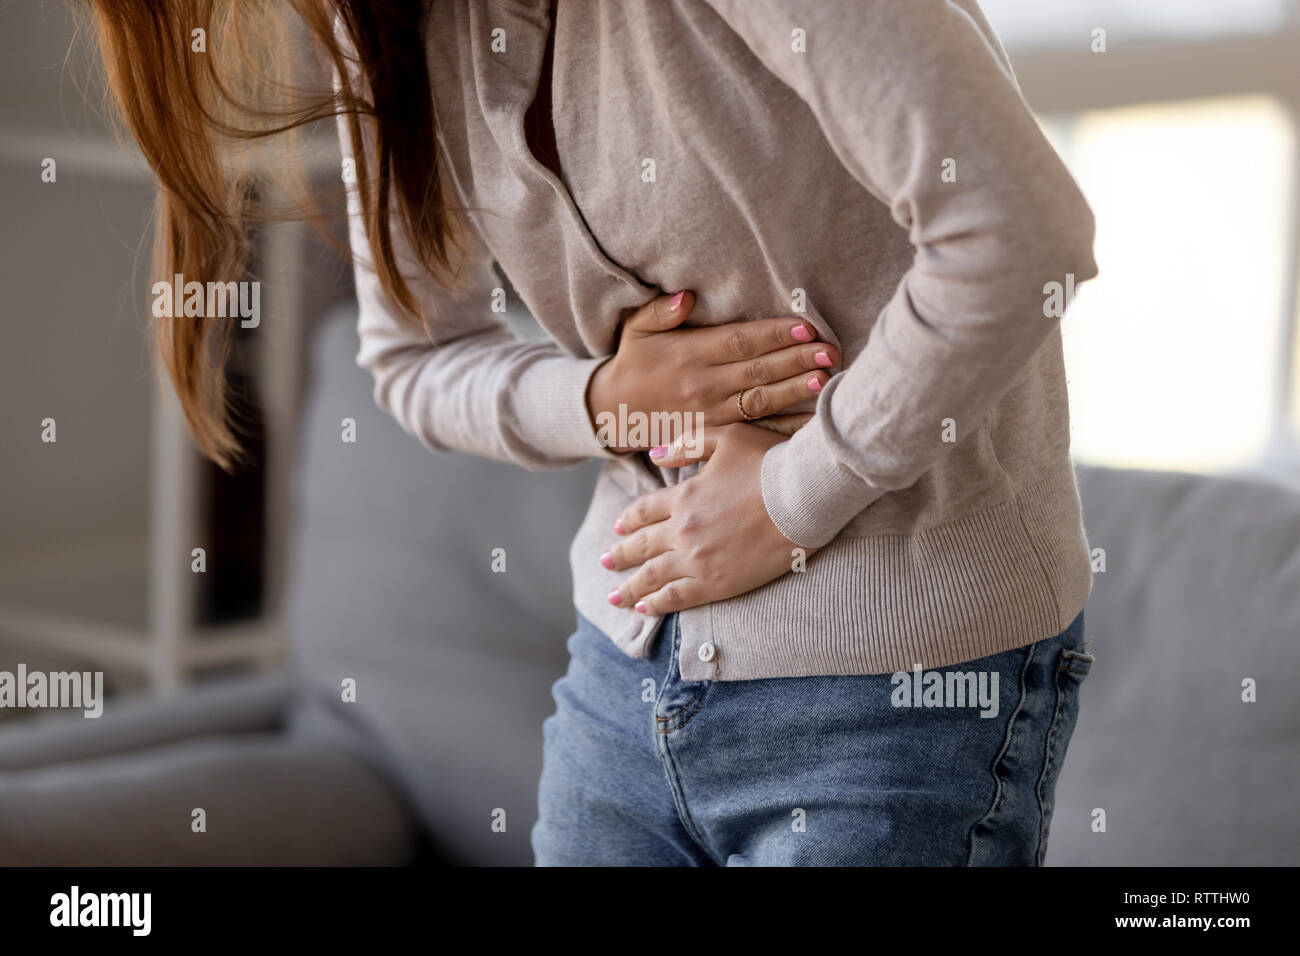 Close up woman holding belly, feeling pain, health problem concept Stock Photo